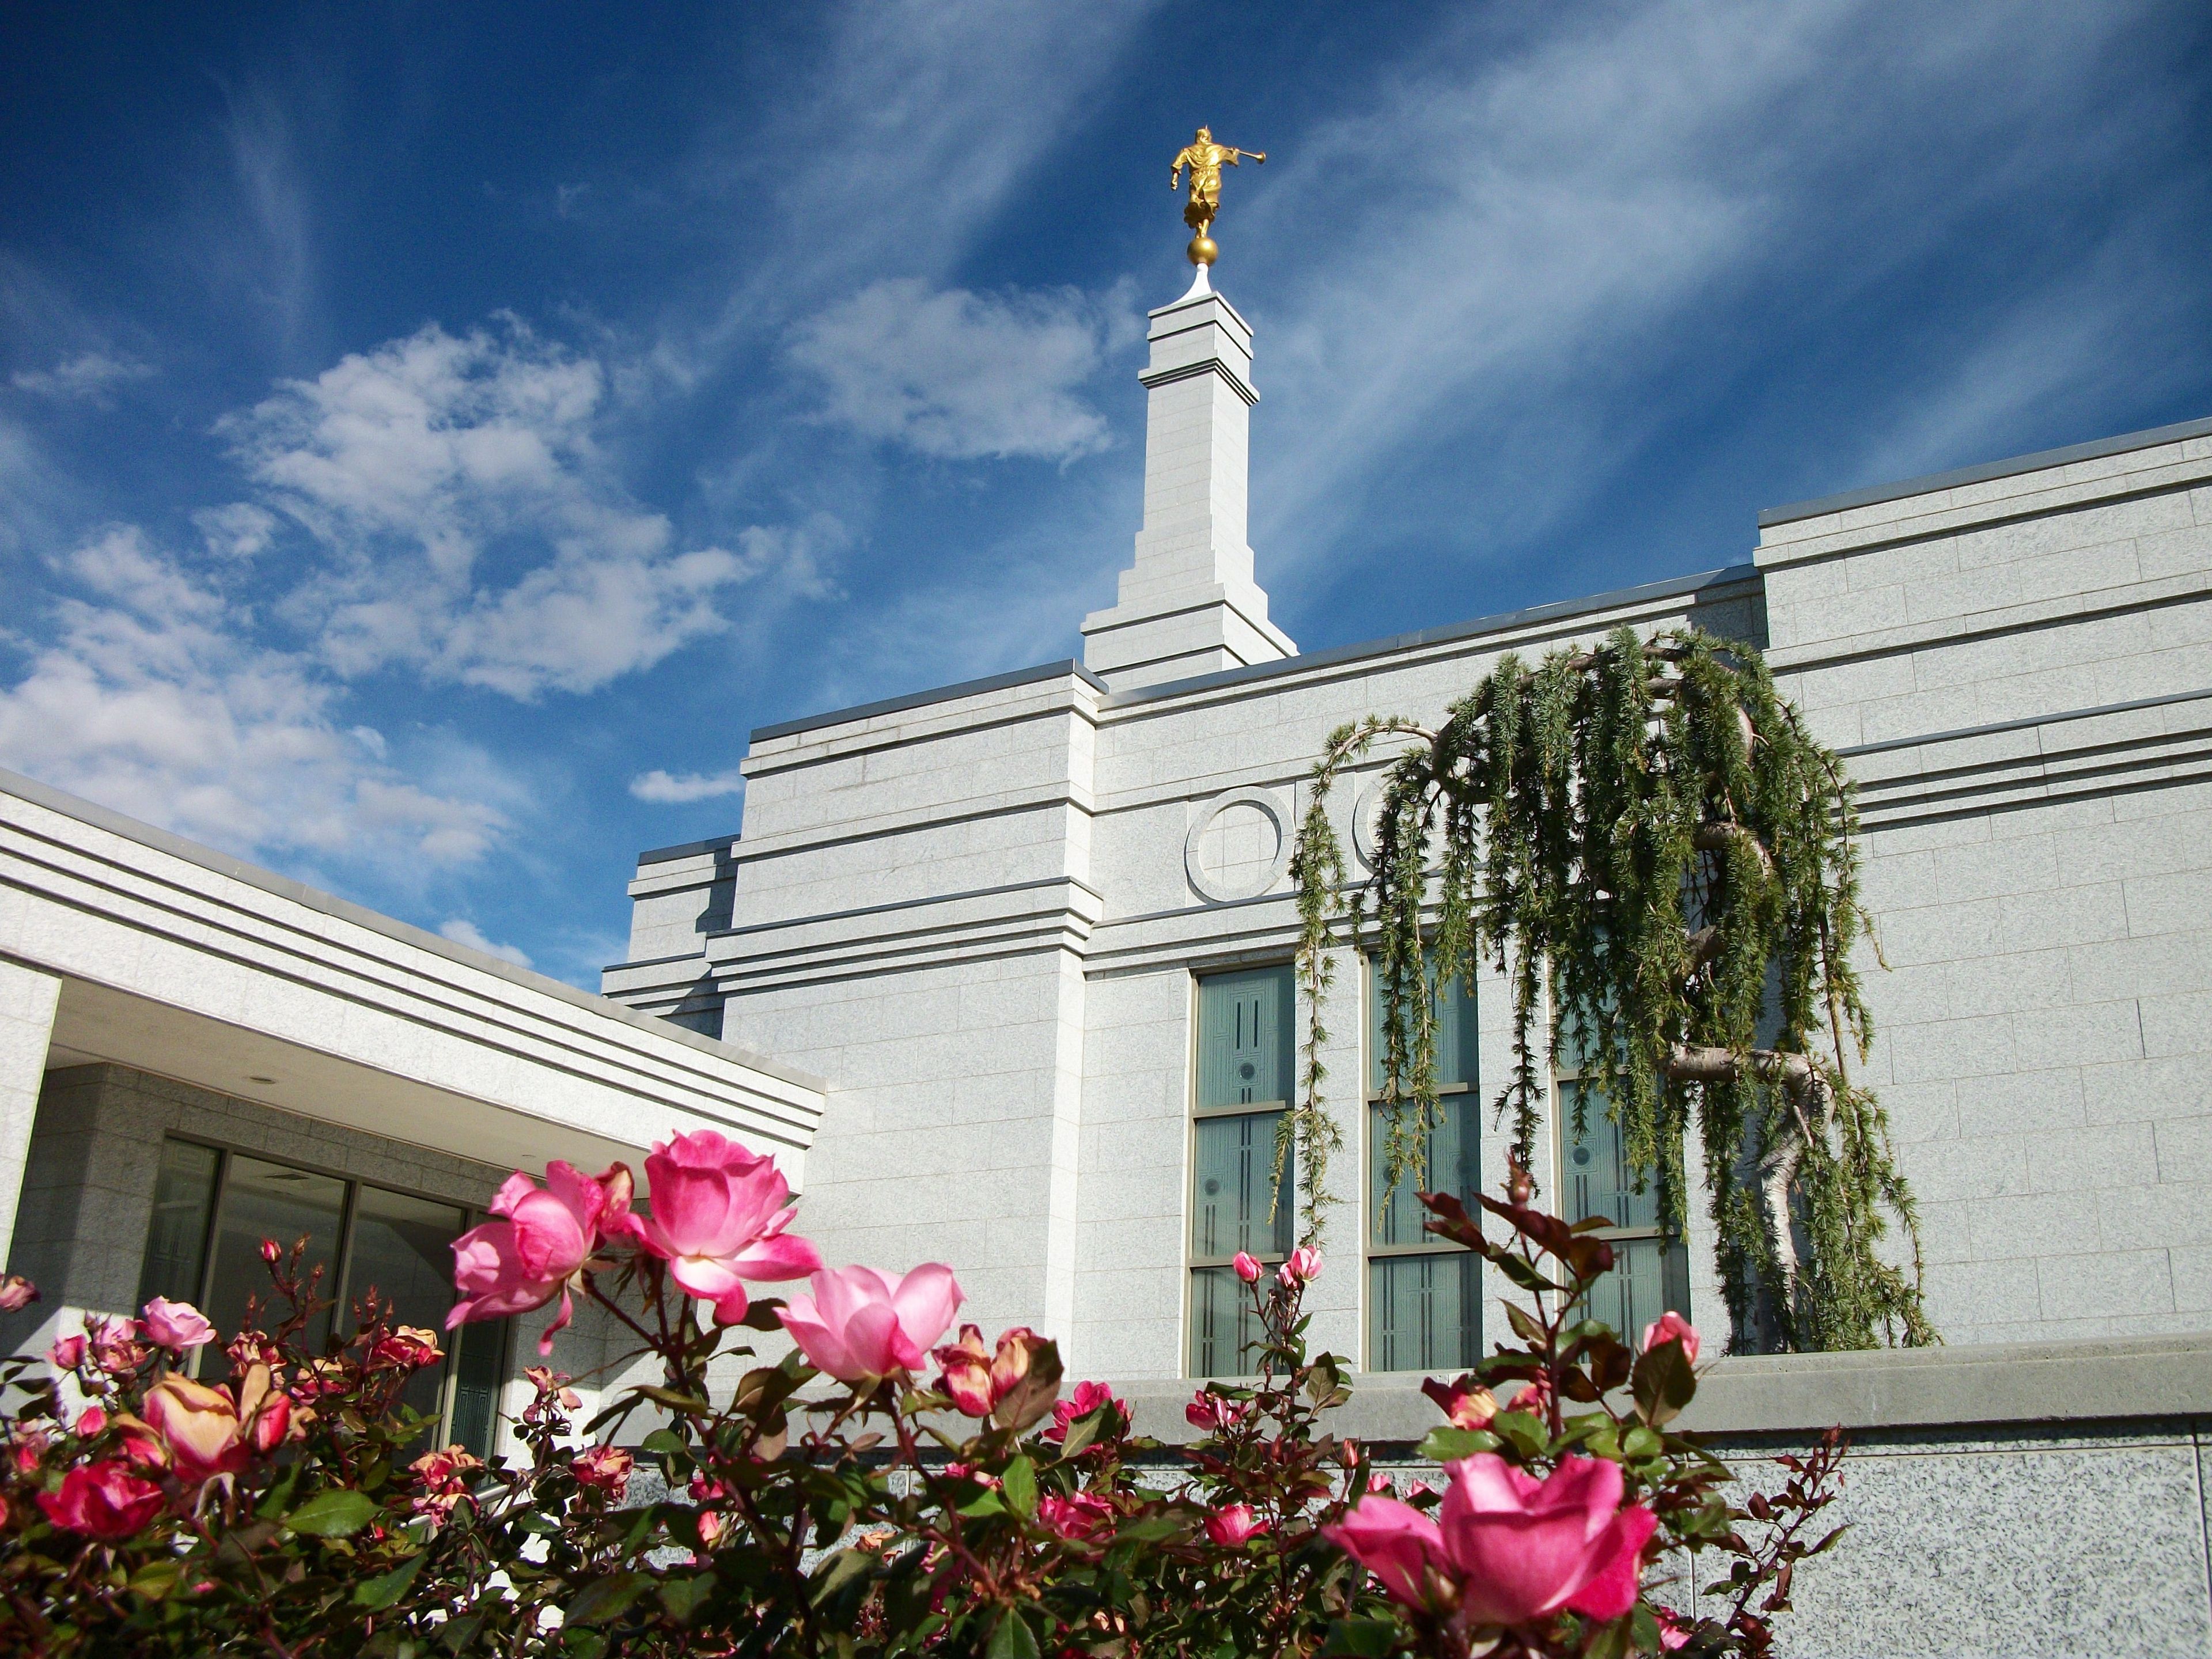 The Reno Nevada Temple, including the entrance and scenery.